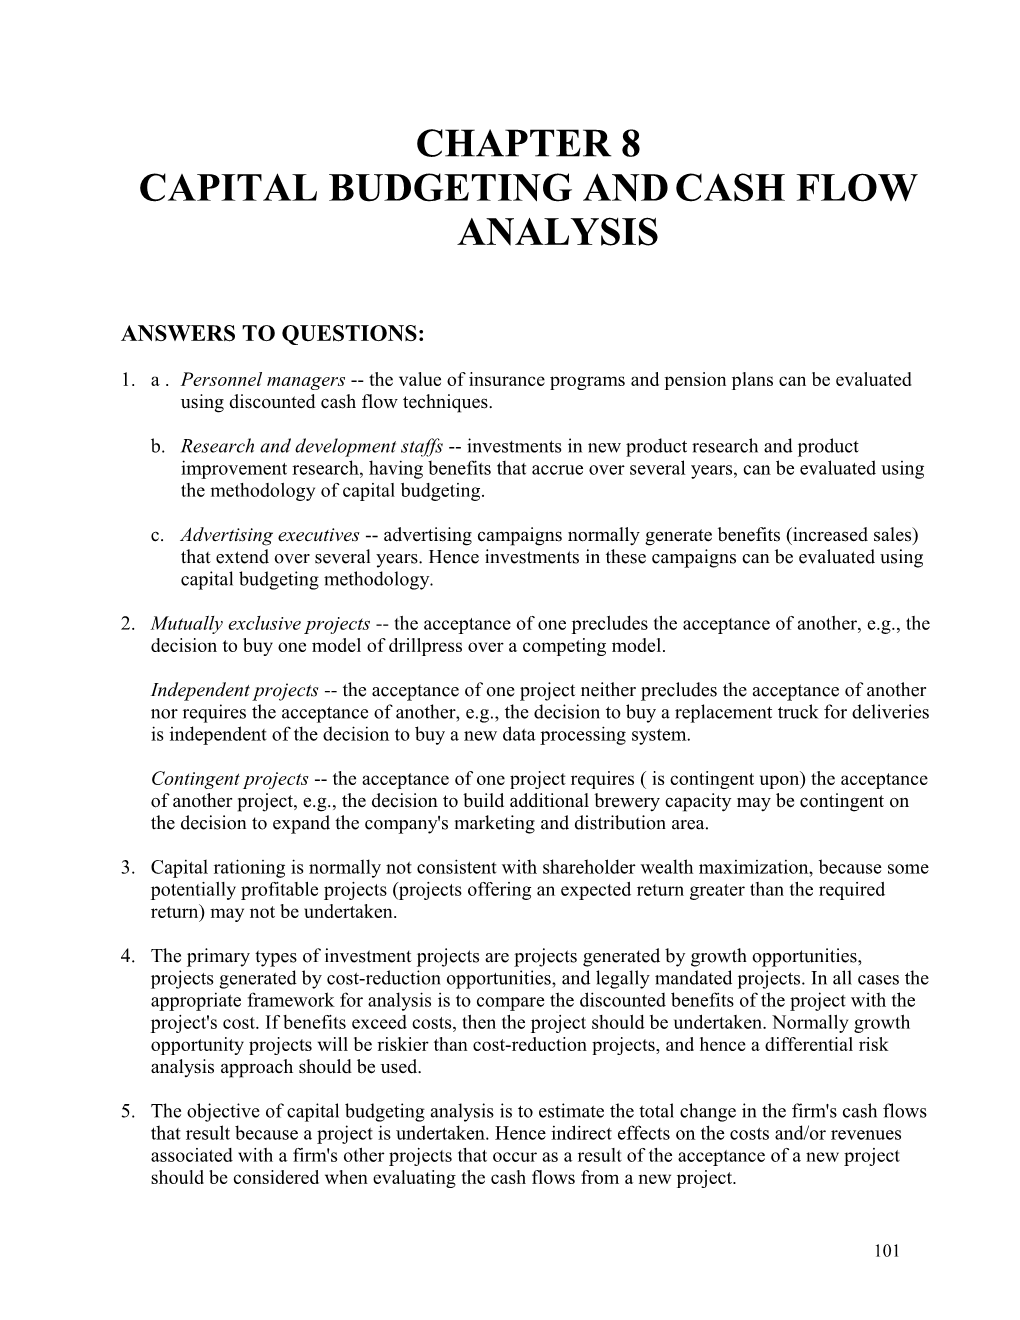 Chapter 8/Capital Budgeting and Cash Flow Analysis 1